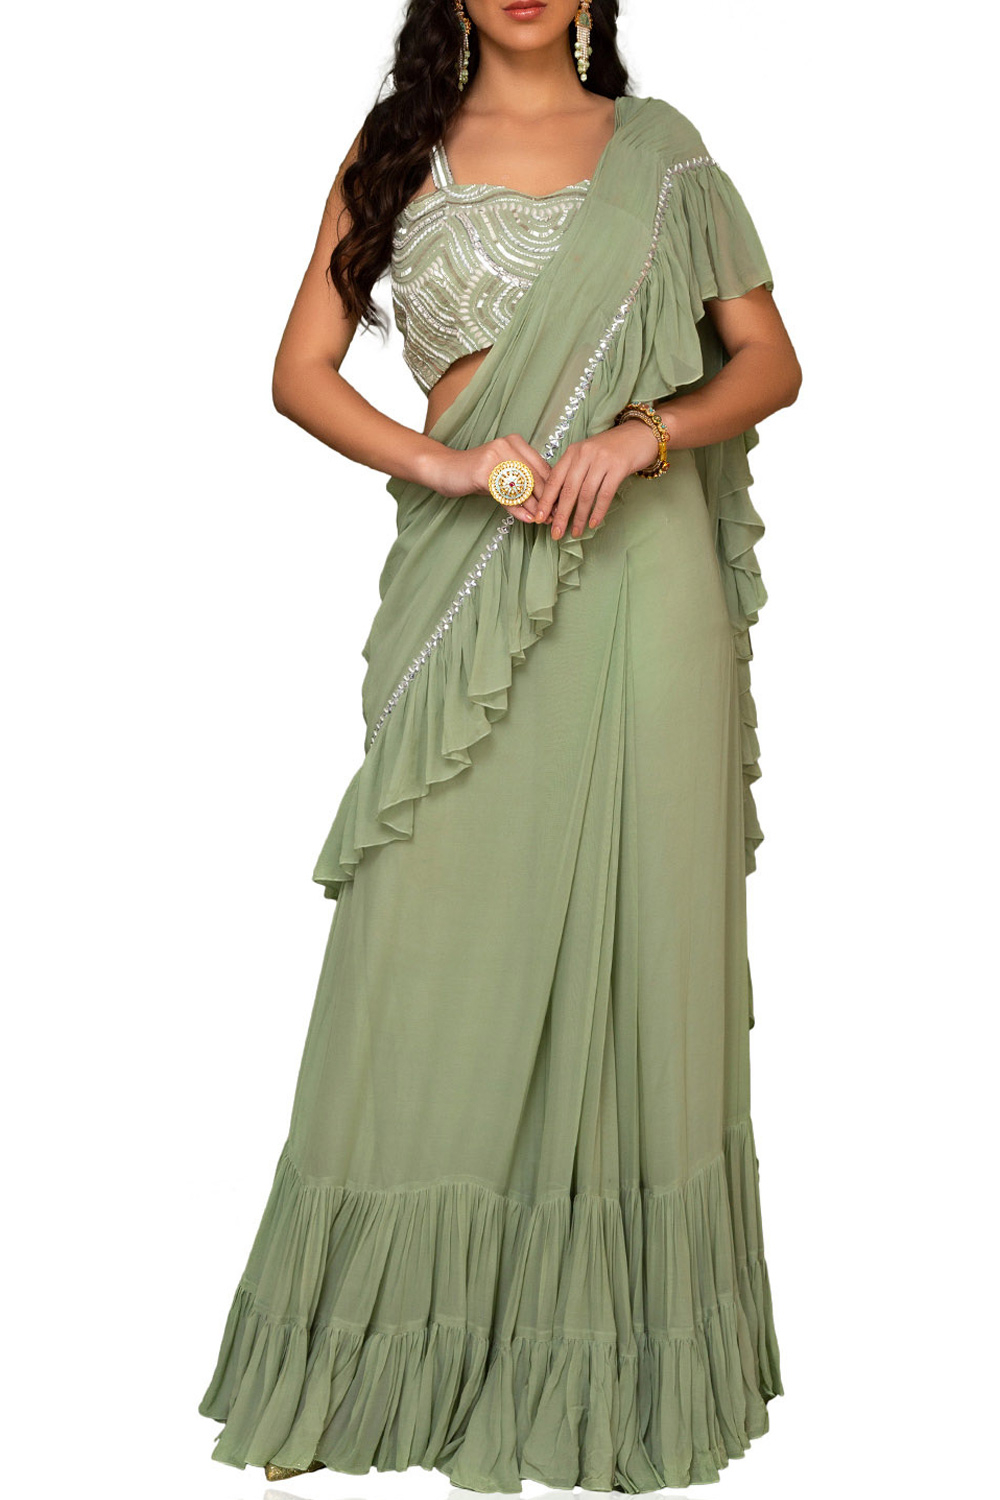 Sage green frill saree with blouse by Chhavvi Aggarwal available ...